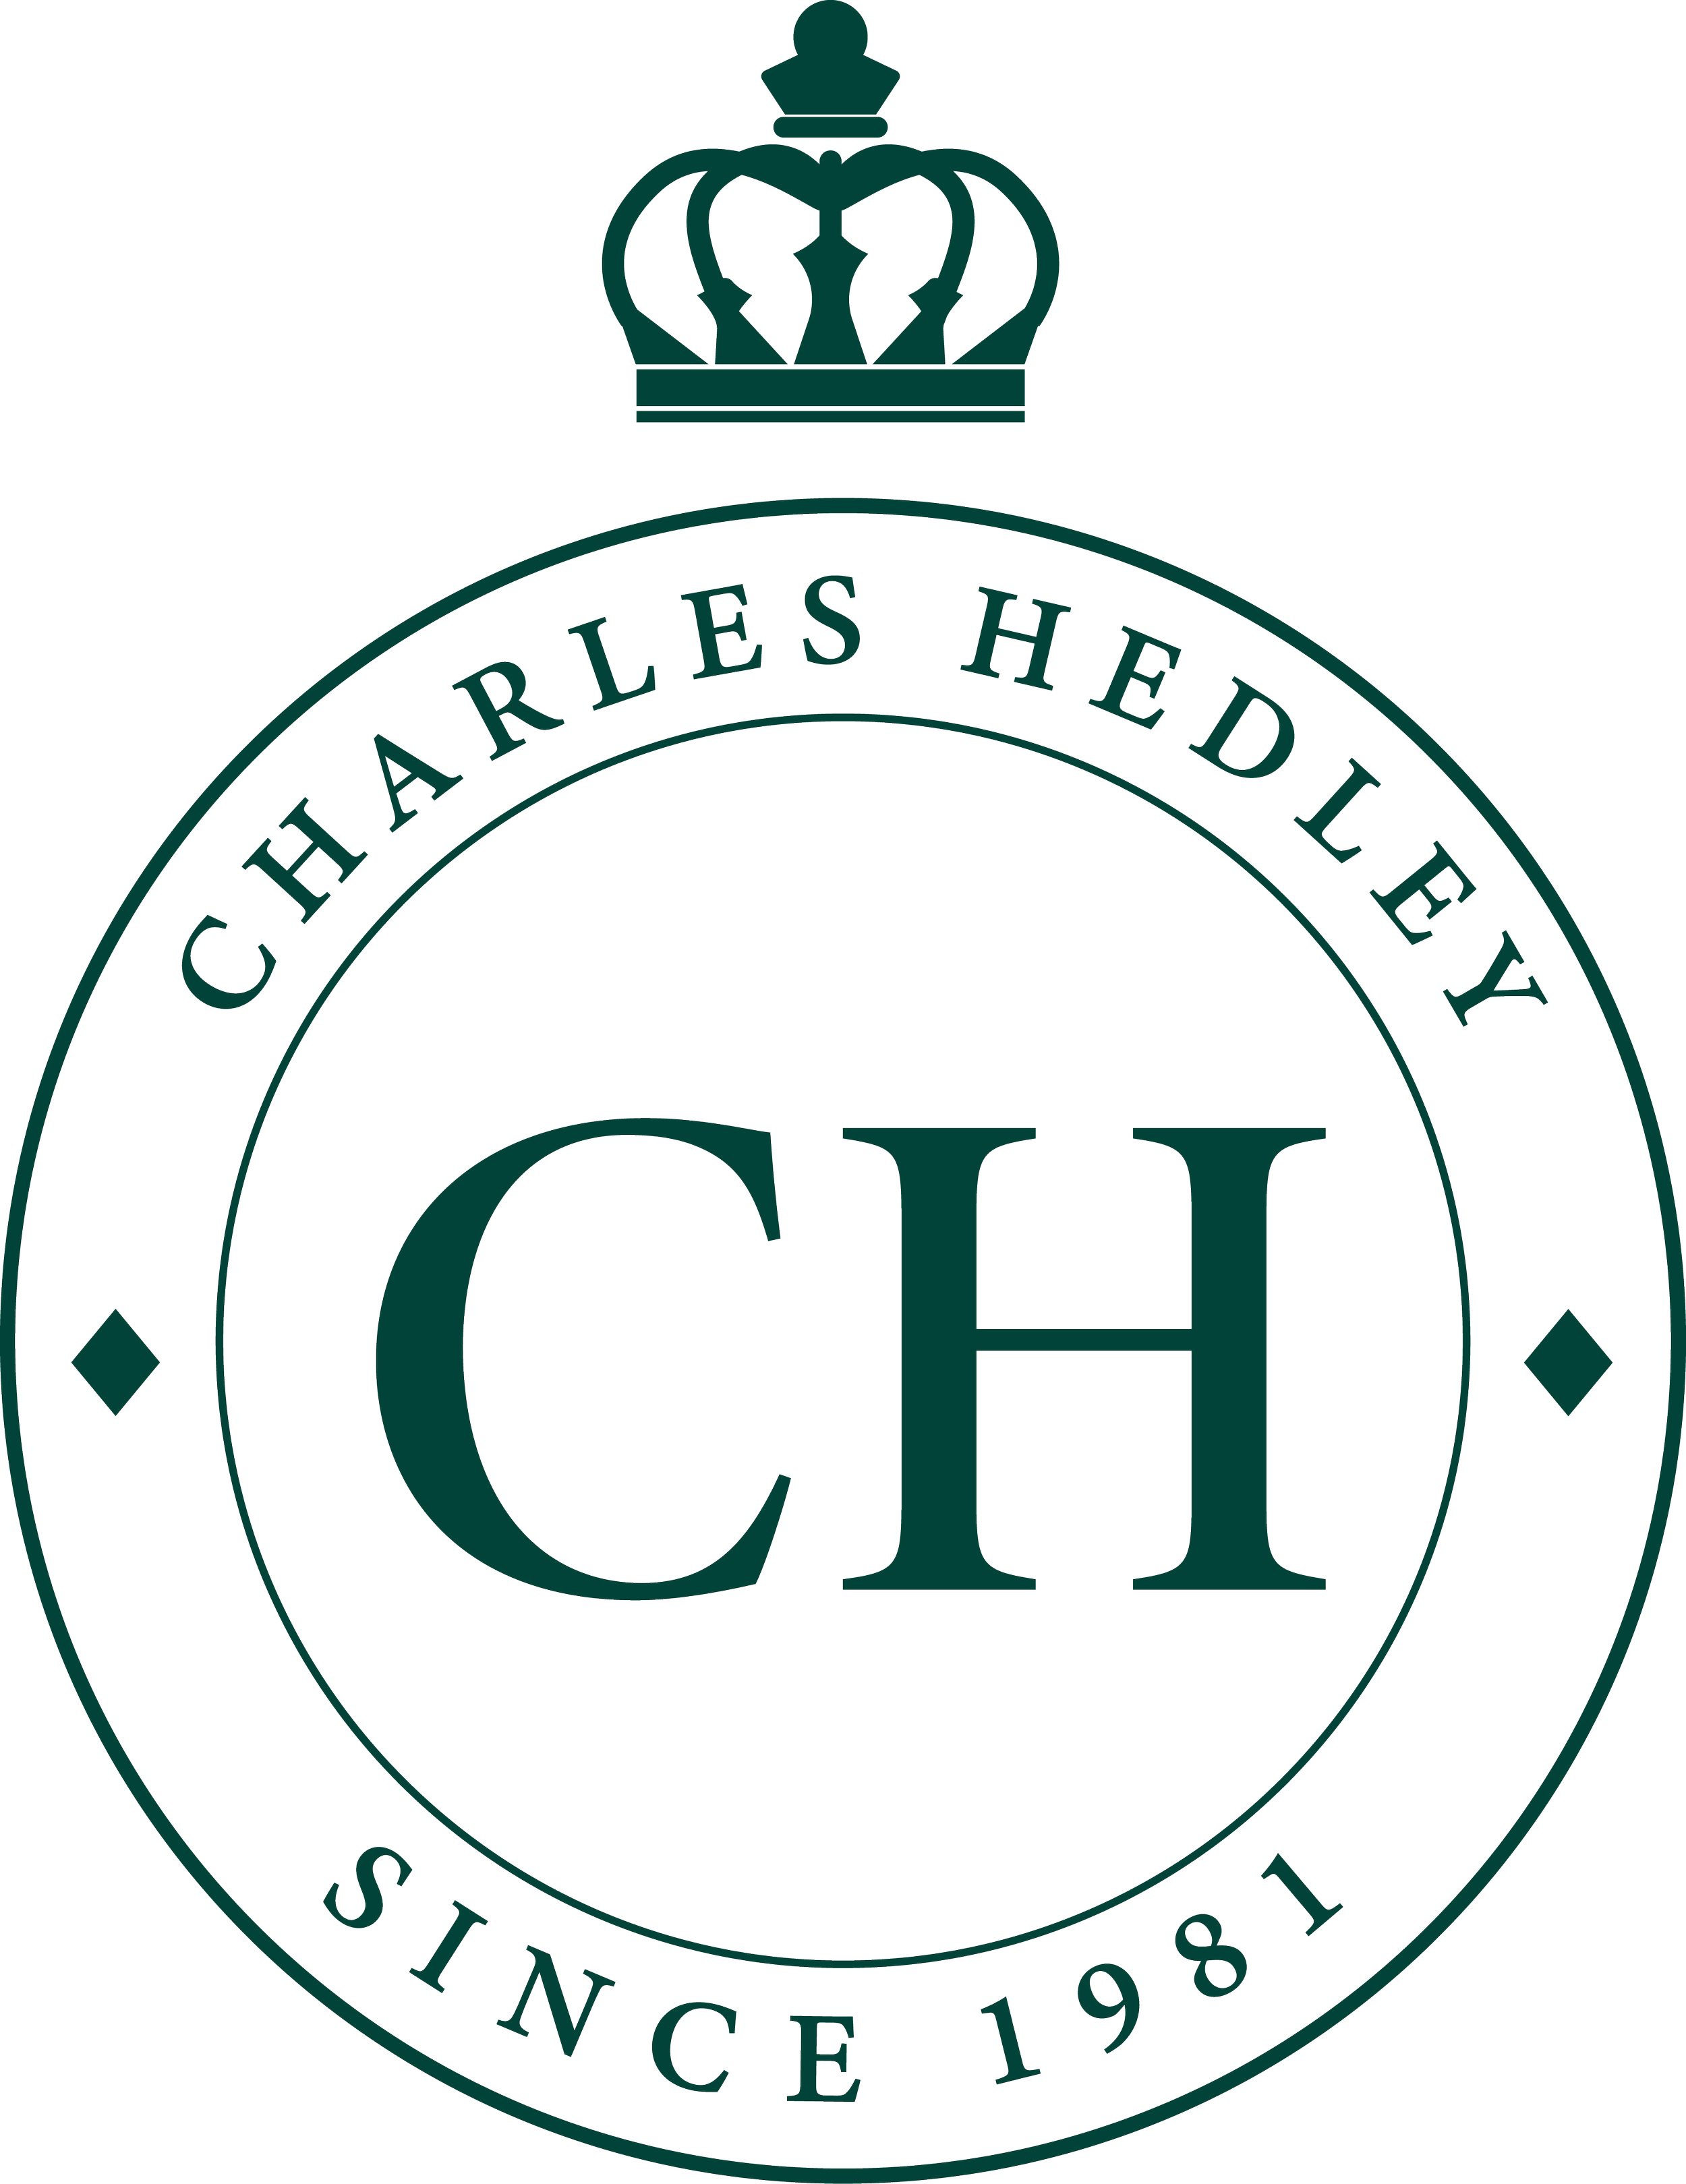 Did you know that the Louis - Charles Hedley Luxury